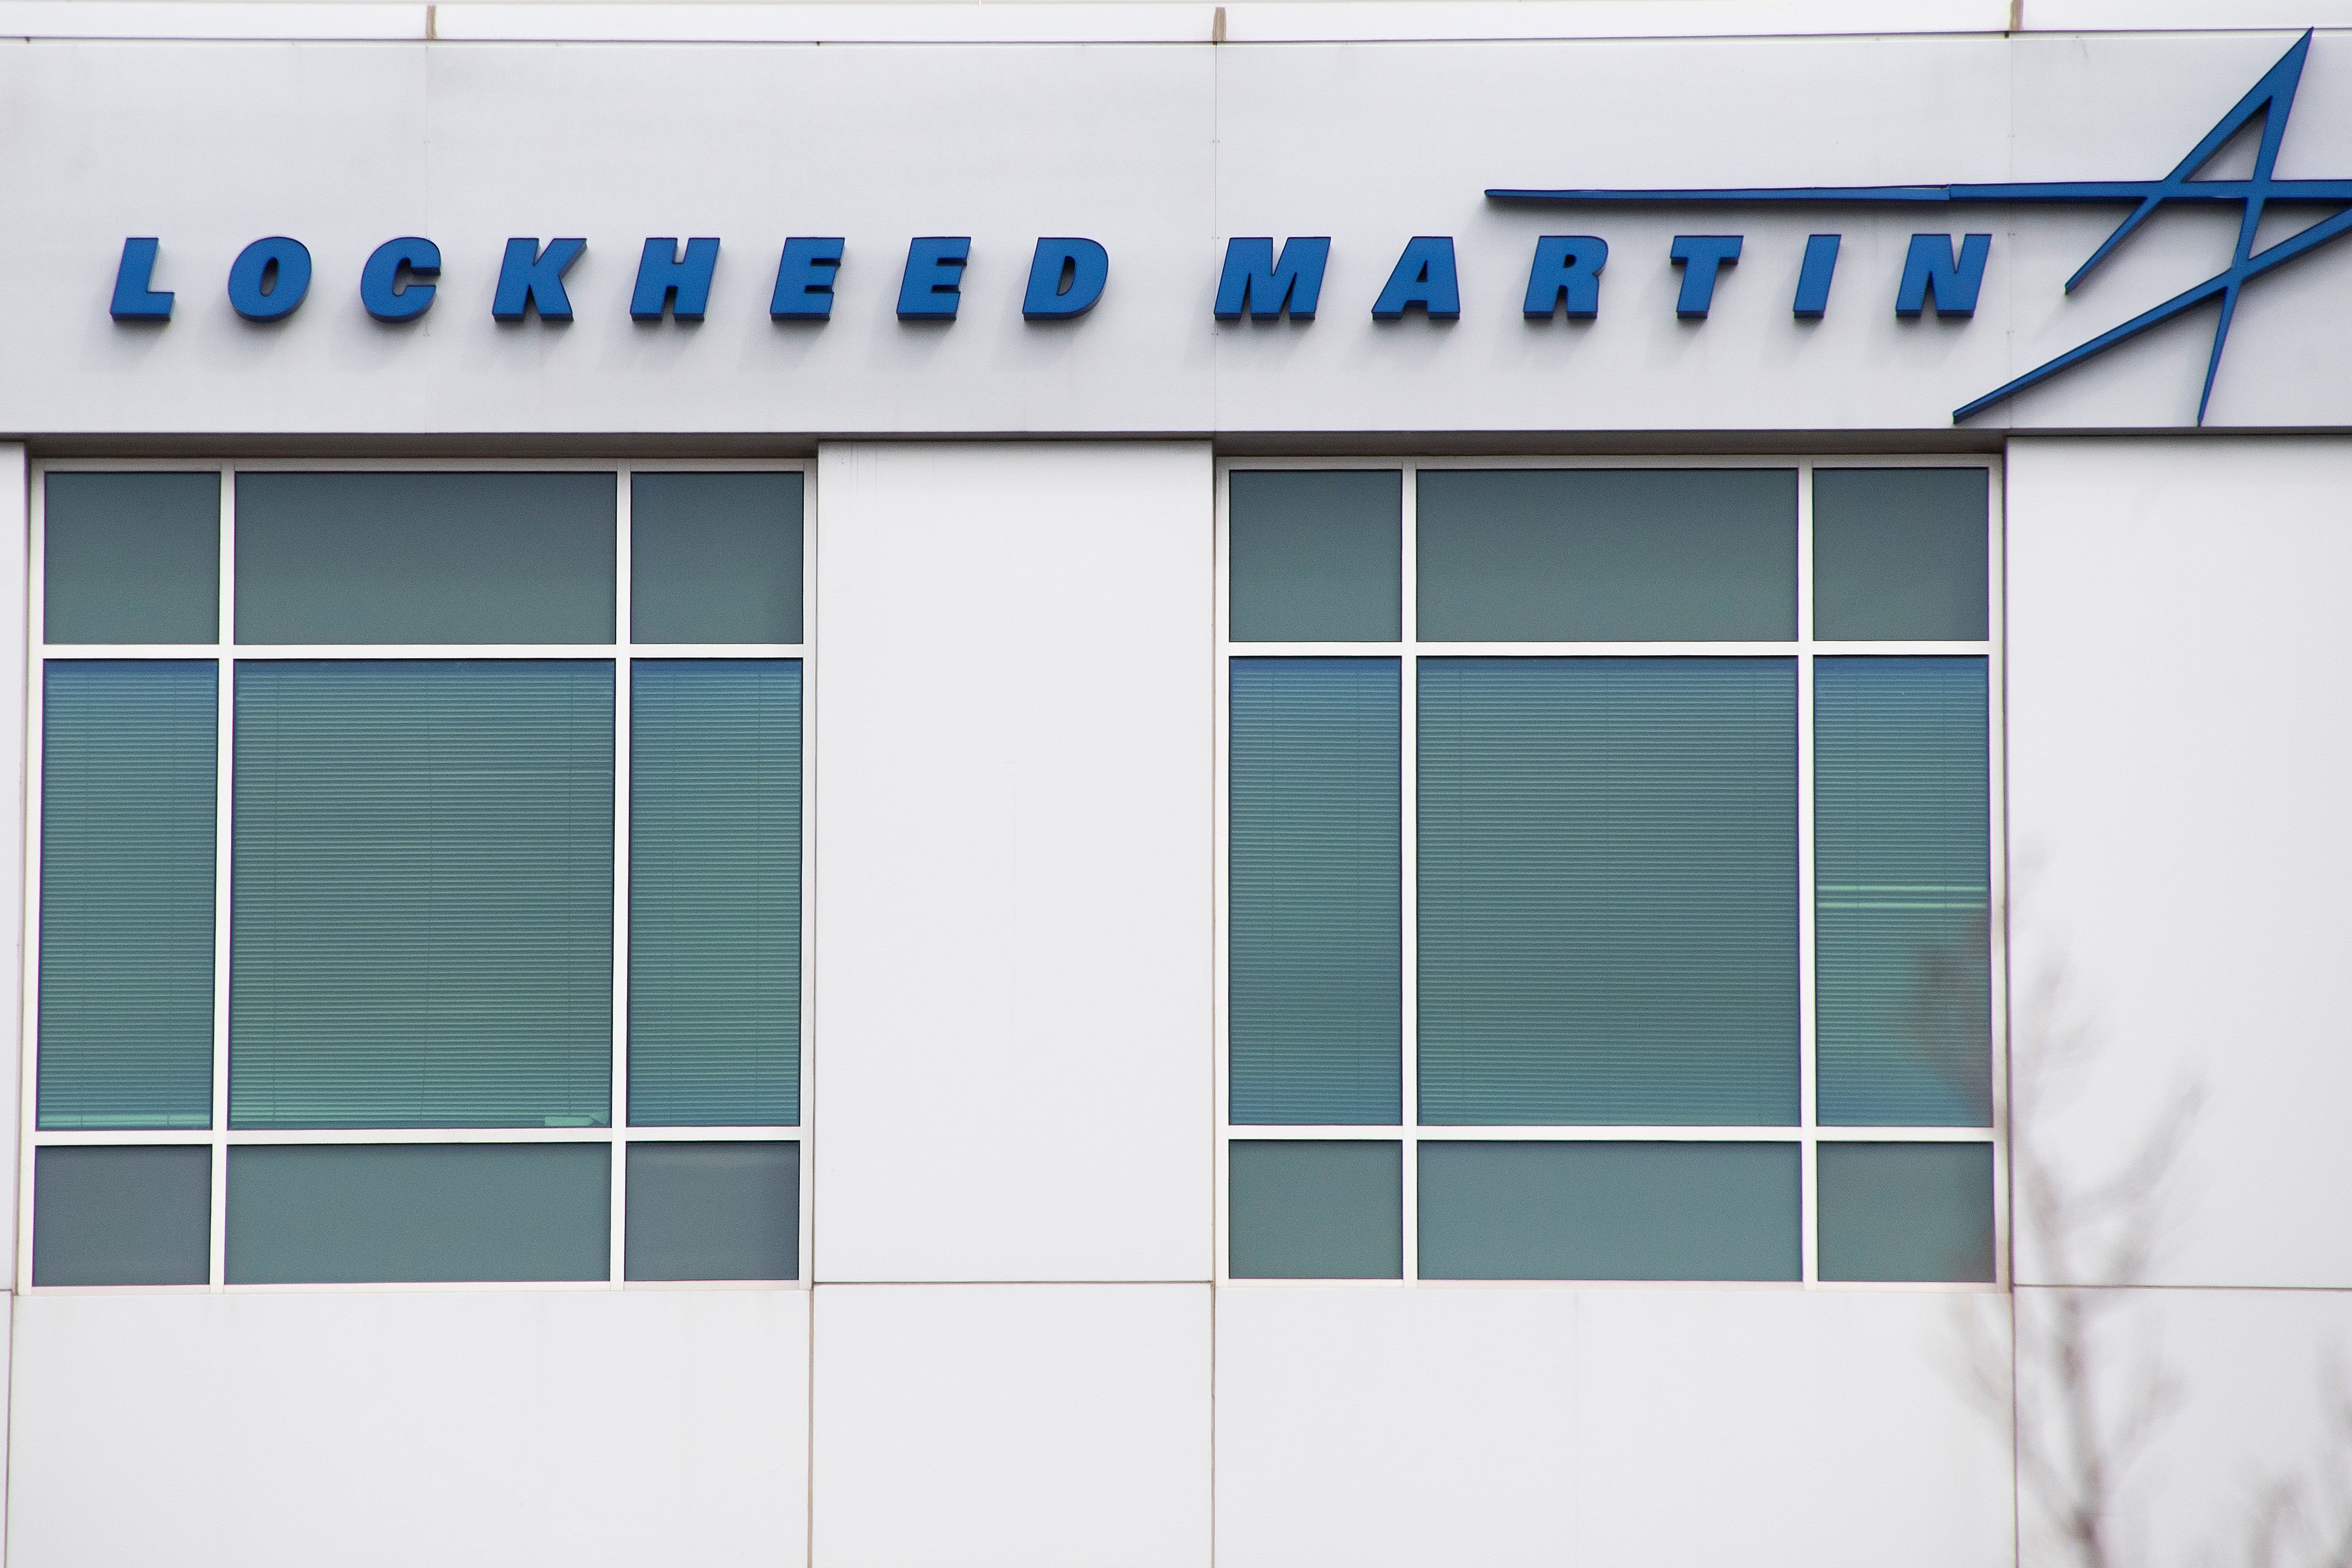 Goldman Sachs downgrades Lockheed Martin, says shares could fall 28% if government reduces defense spending